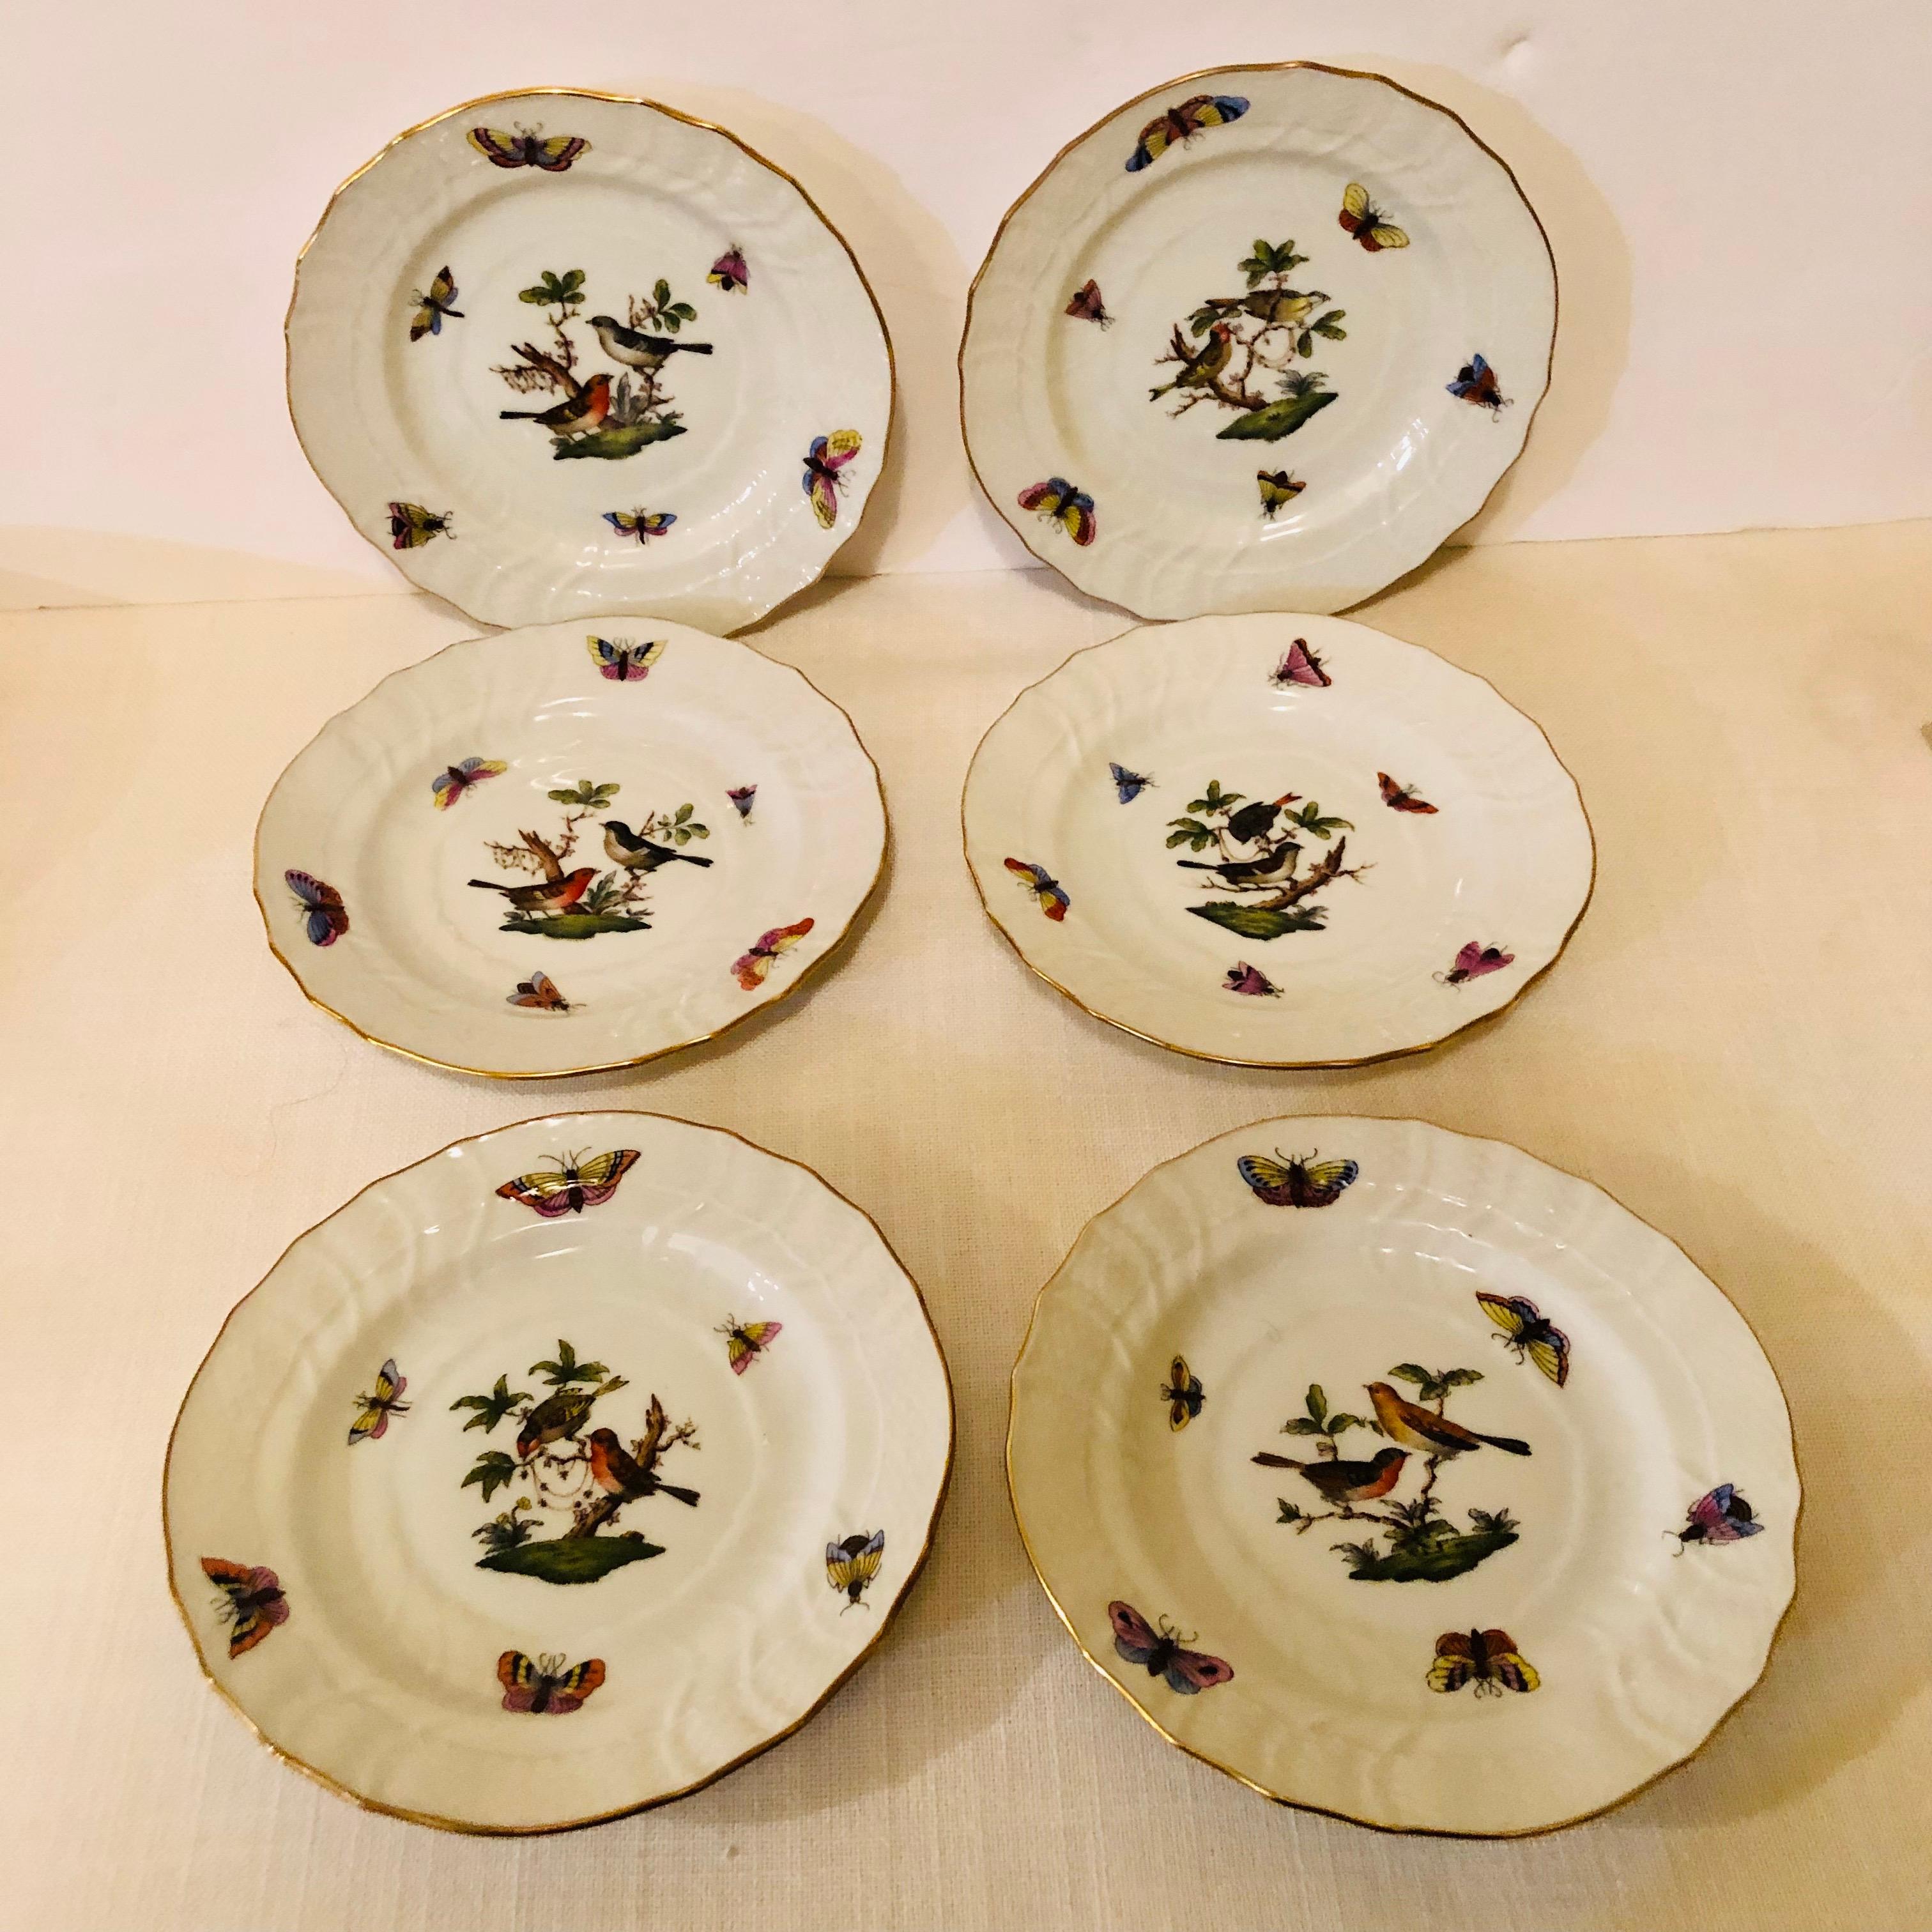 These are a set of twelve Herend Rothschild Bird bread or appetizer plates, each hand painted with two birds decorated with accents of colorful butterflies and insects. This set would be a wonderful addition to any dinner service. It is an beautiful